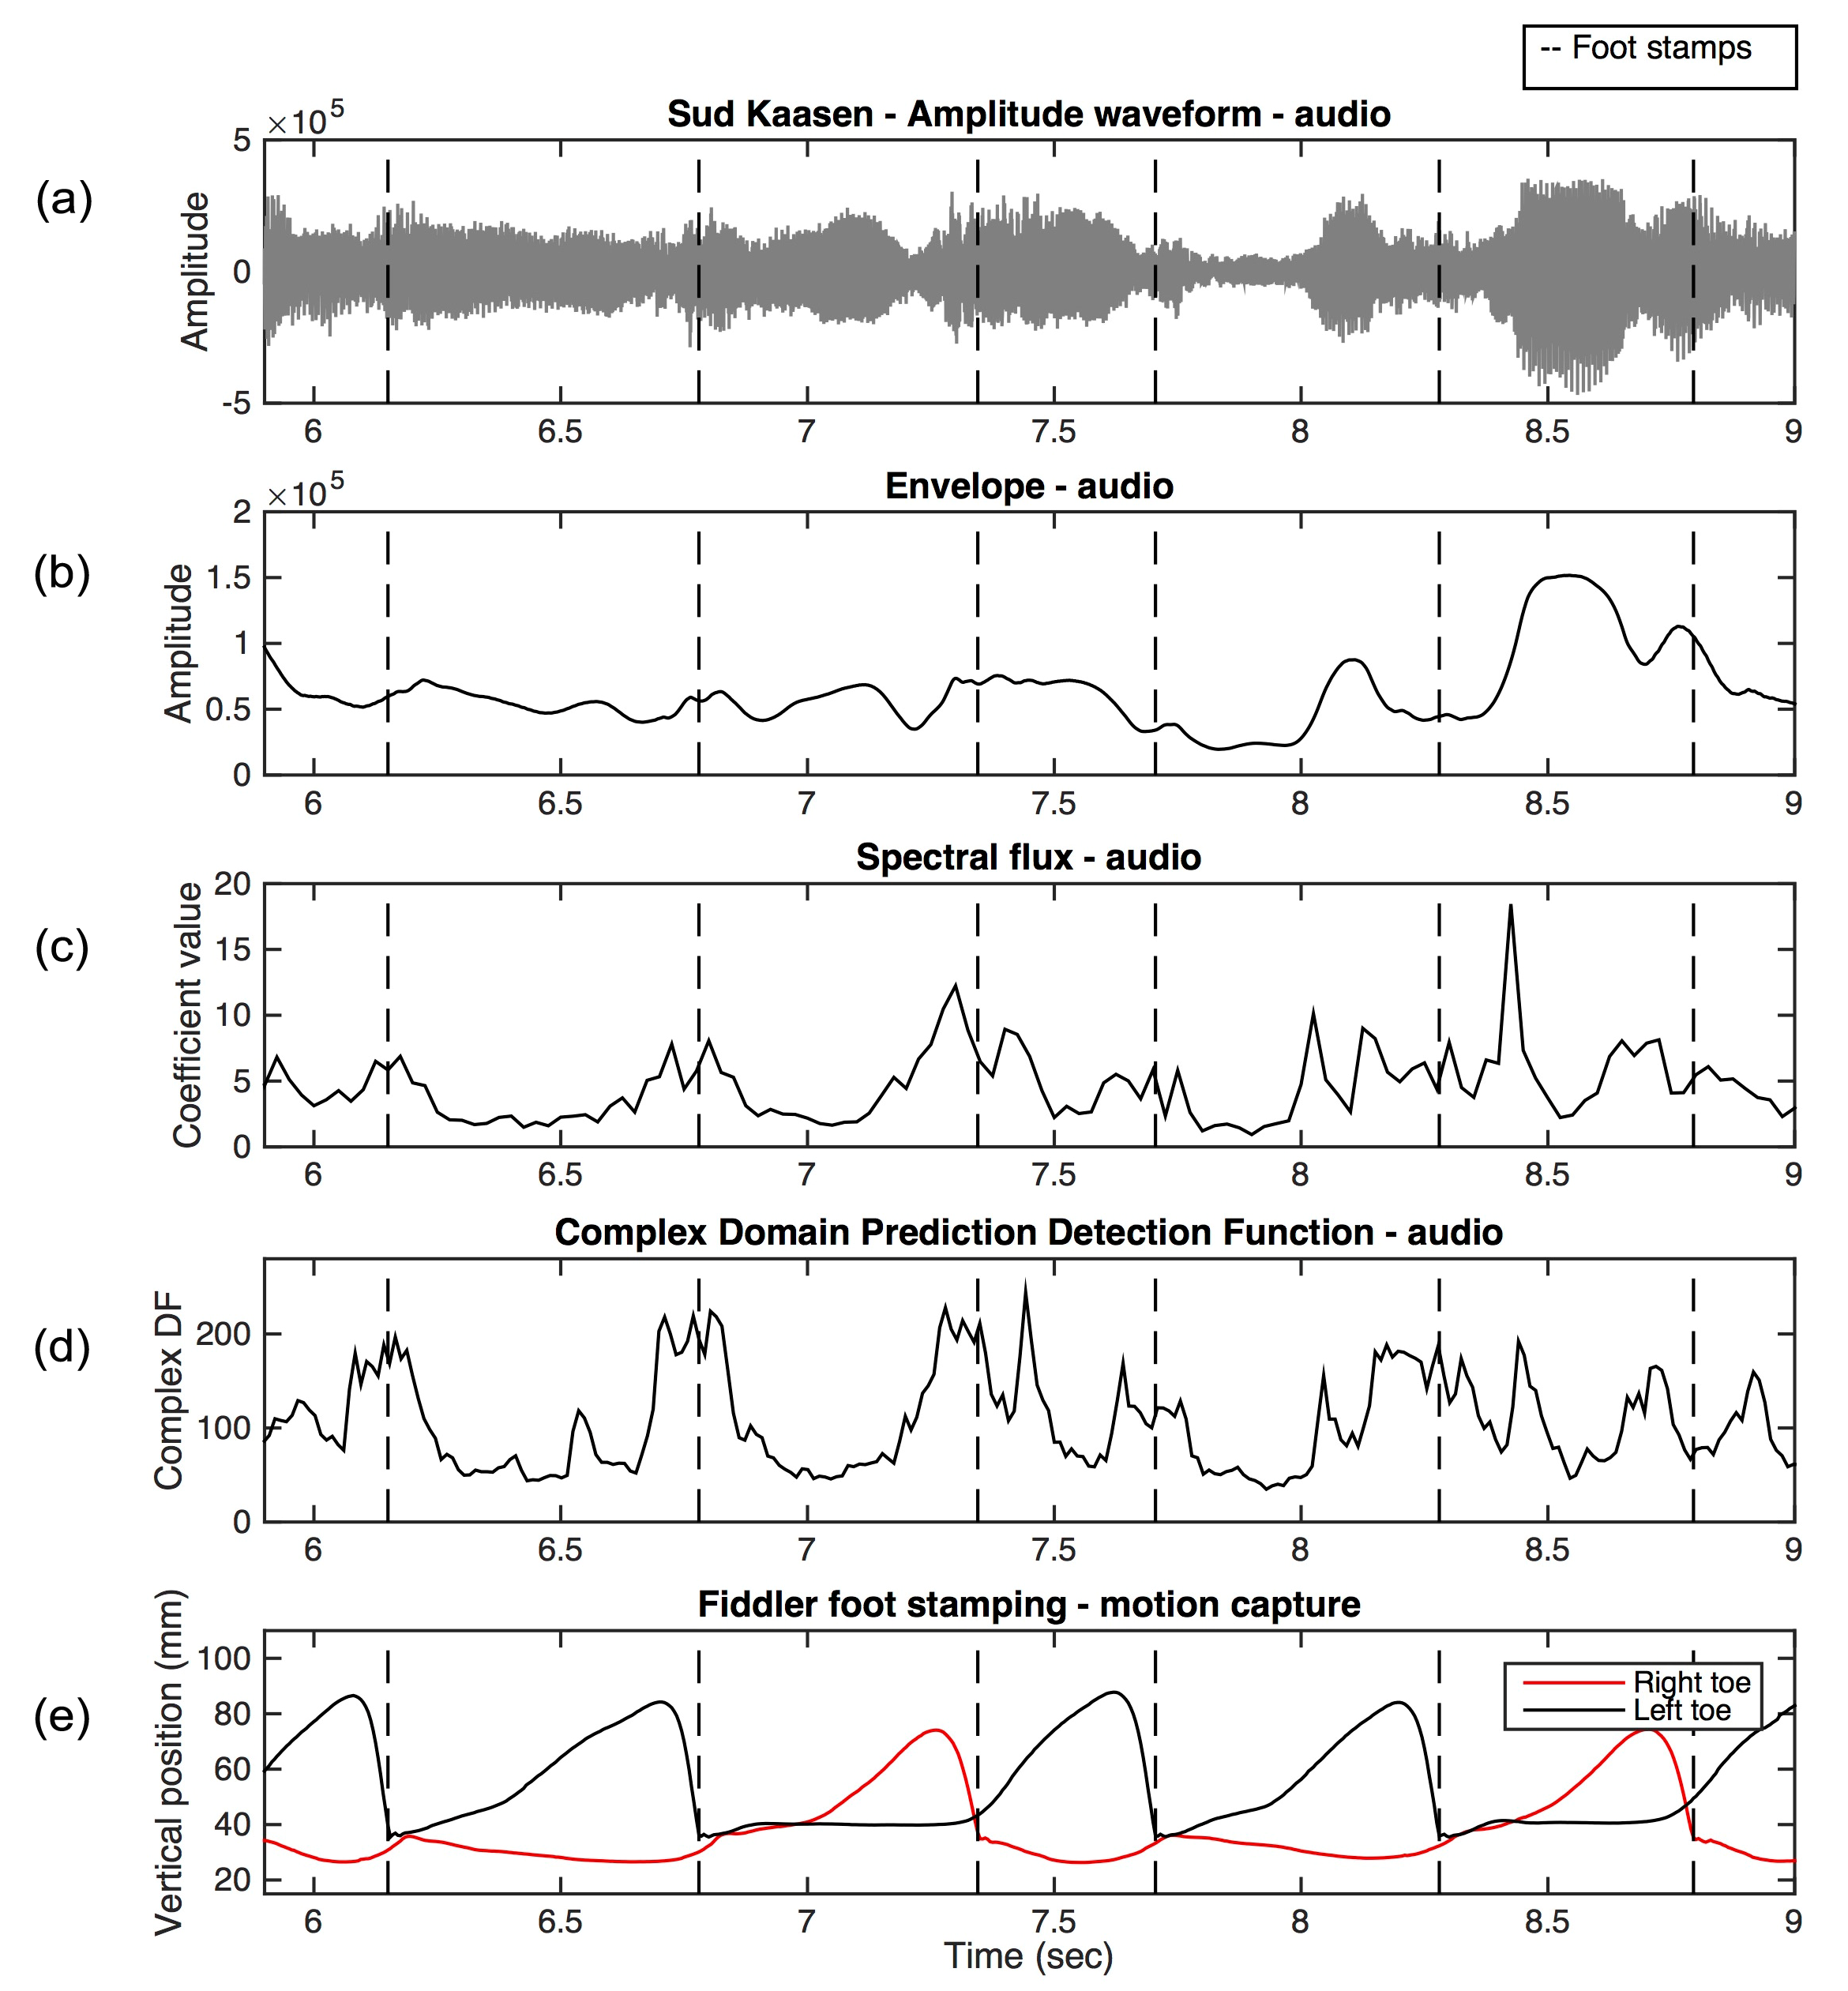 Image showing five line graphs labeled, from top to bottom, 'Sud Kaasen - Amplitude waveform - audio', 'Envelope  - audio', 'Spectral flux - audio', 'Complex Domain Prediction Detection Function - audio', and 'Fiddler foot stamping - motion capture'